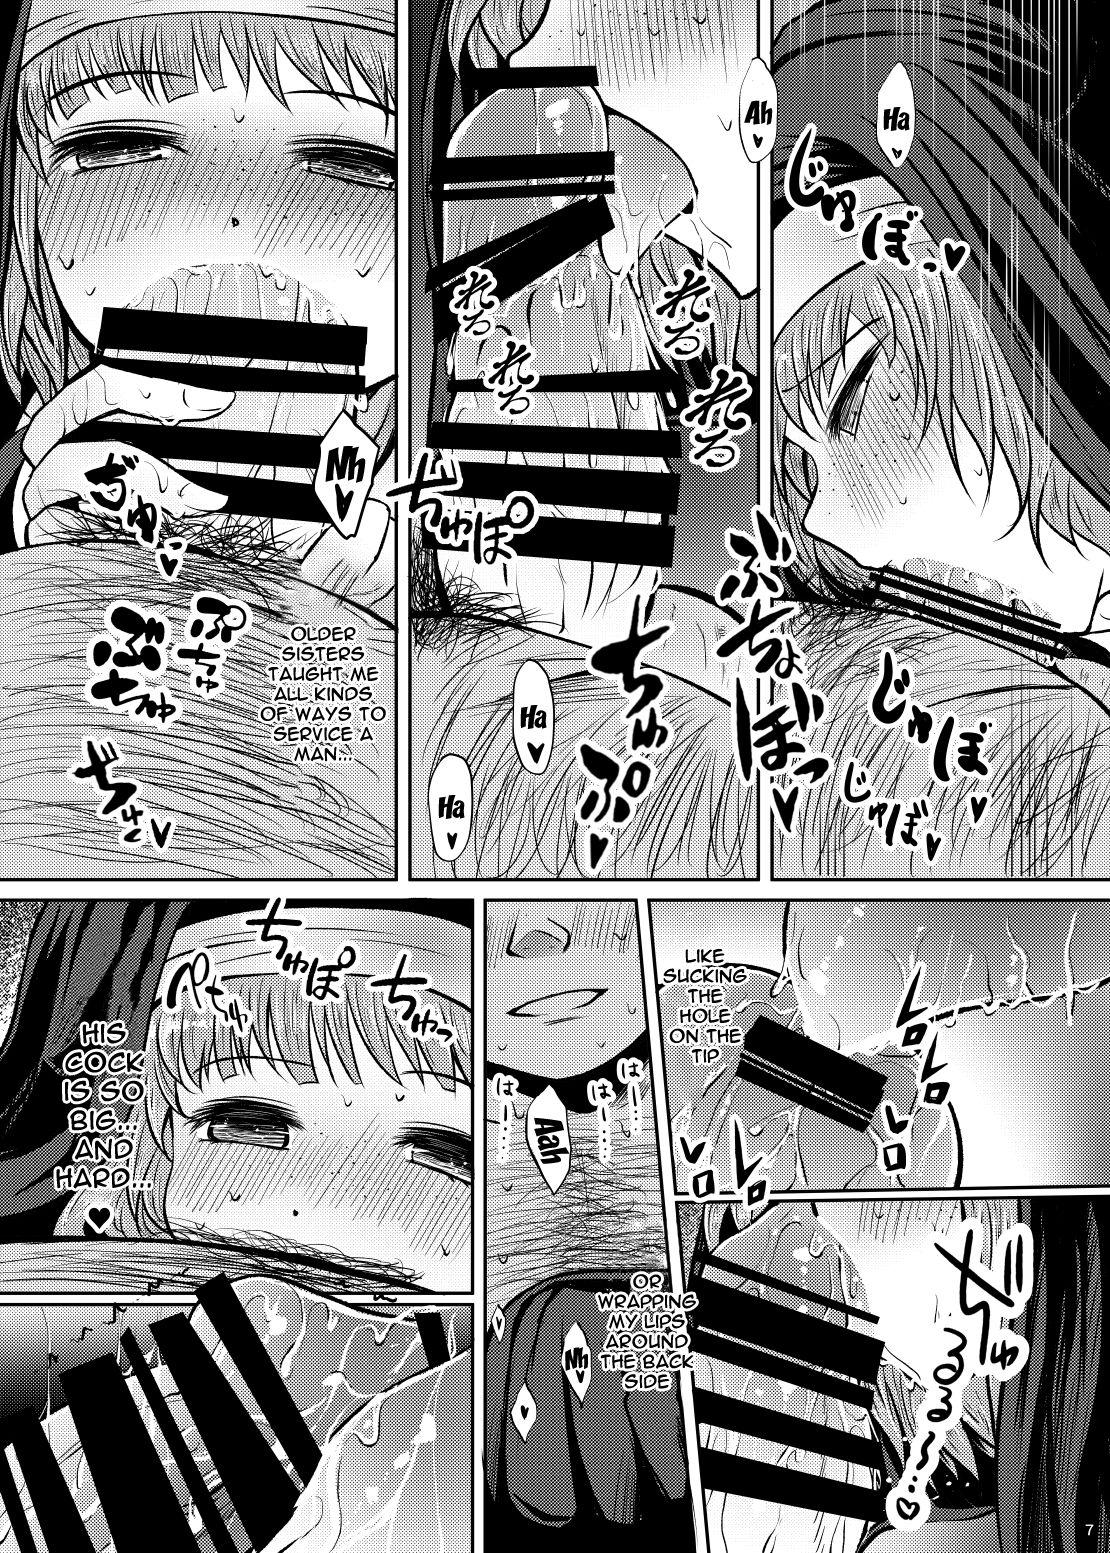 Glamcore Shouginka 10-mai Yadodai Betsu | Paying For Something a Little Extra To Go With The 10 Silver Hotel Room - Original Tiny - Page 6